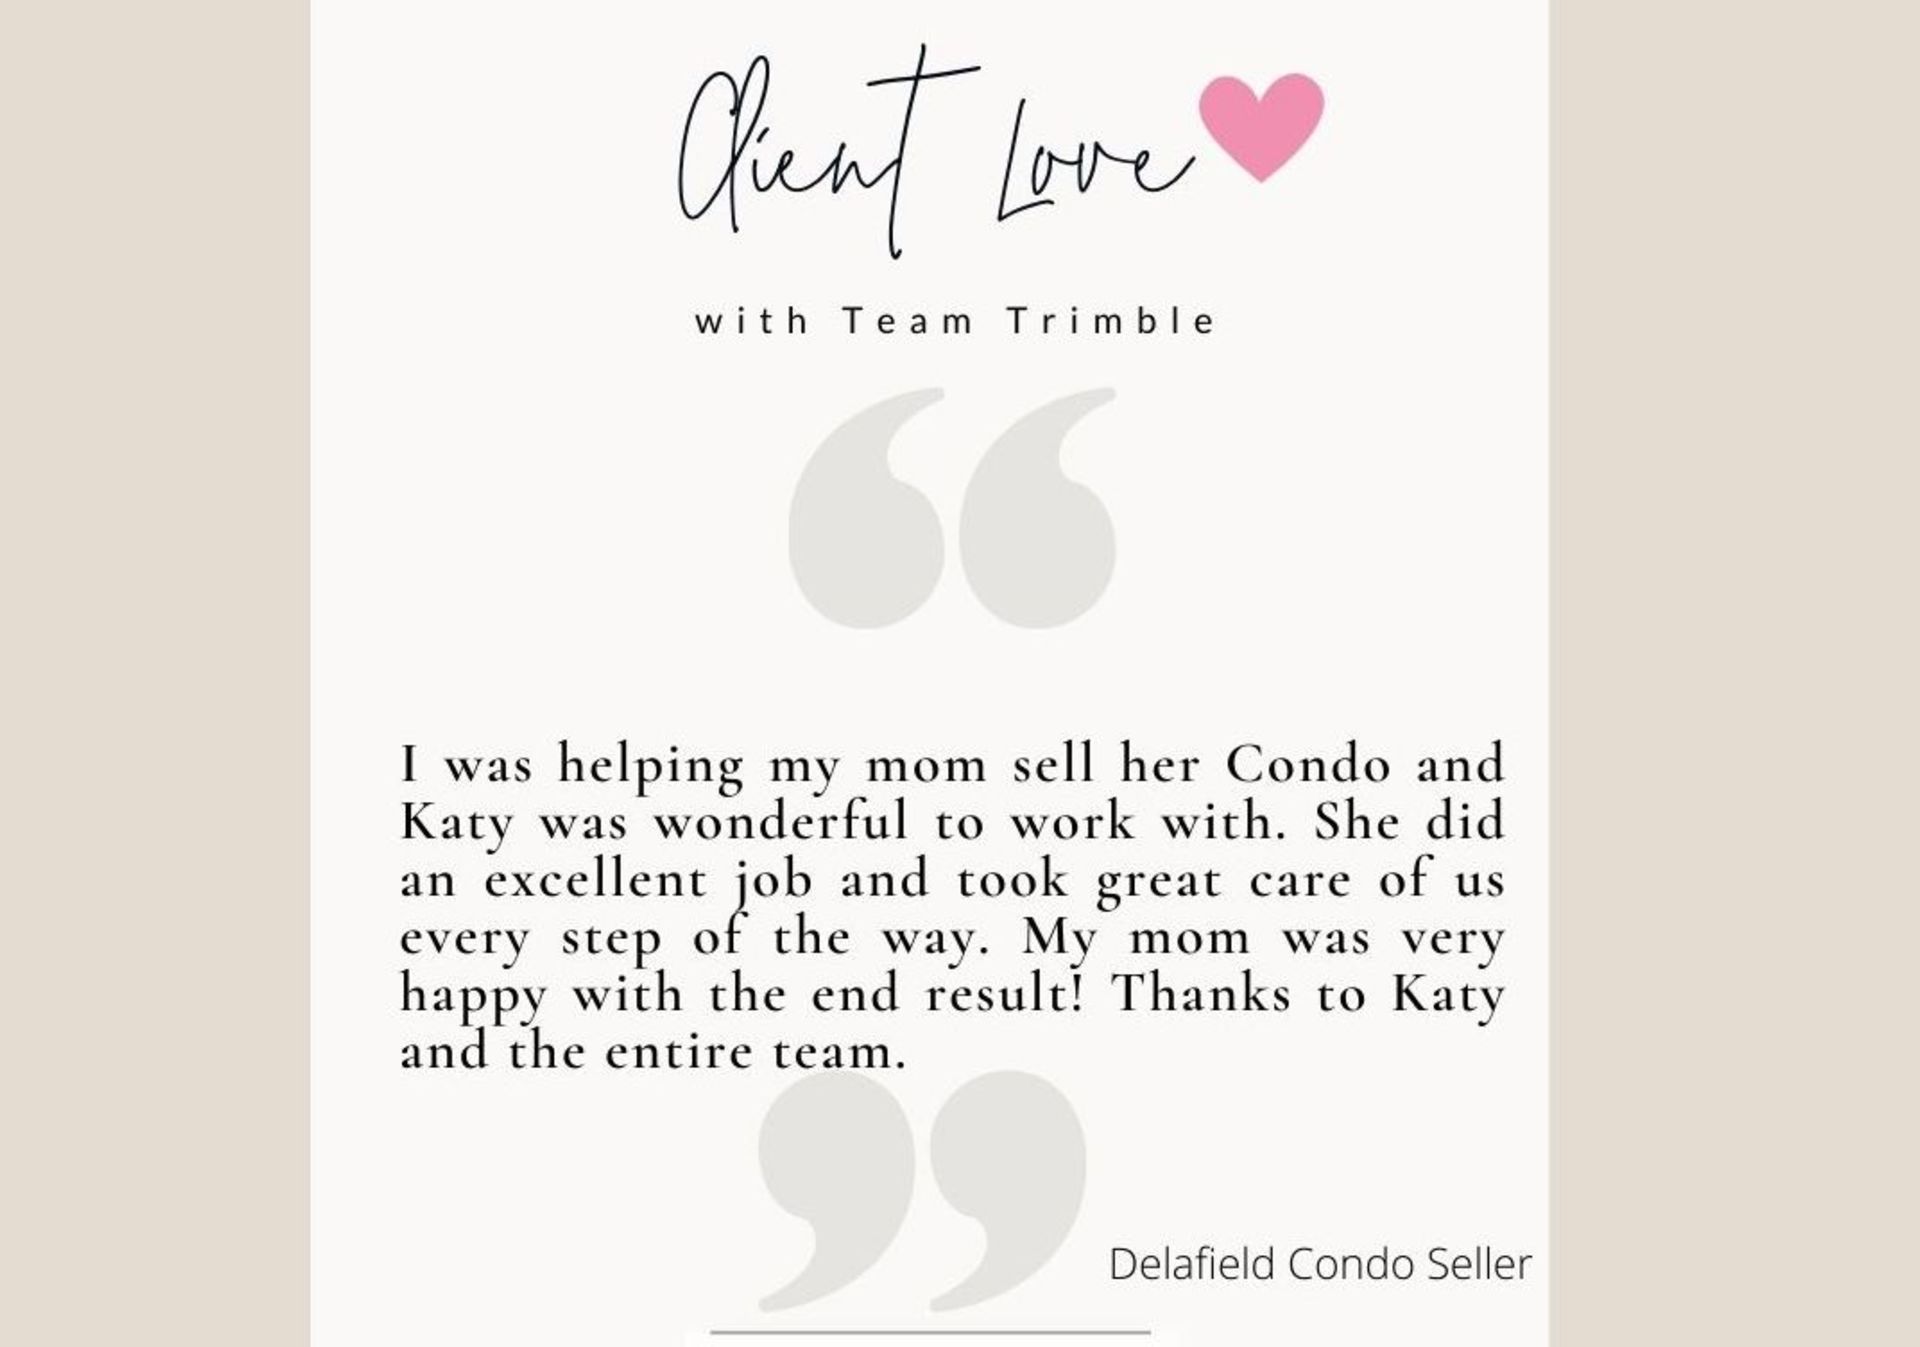 Client Love: Katy took great care of us every step of the way!